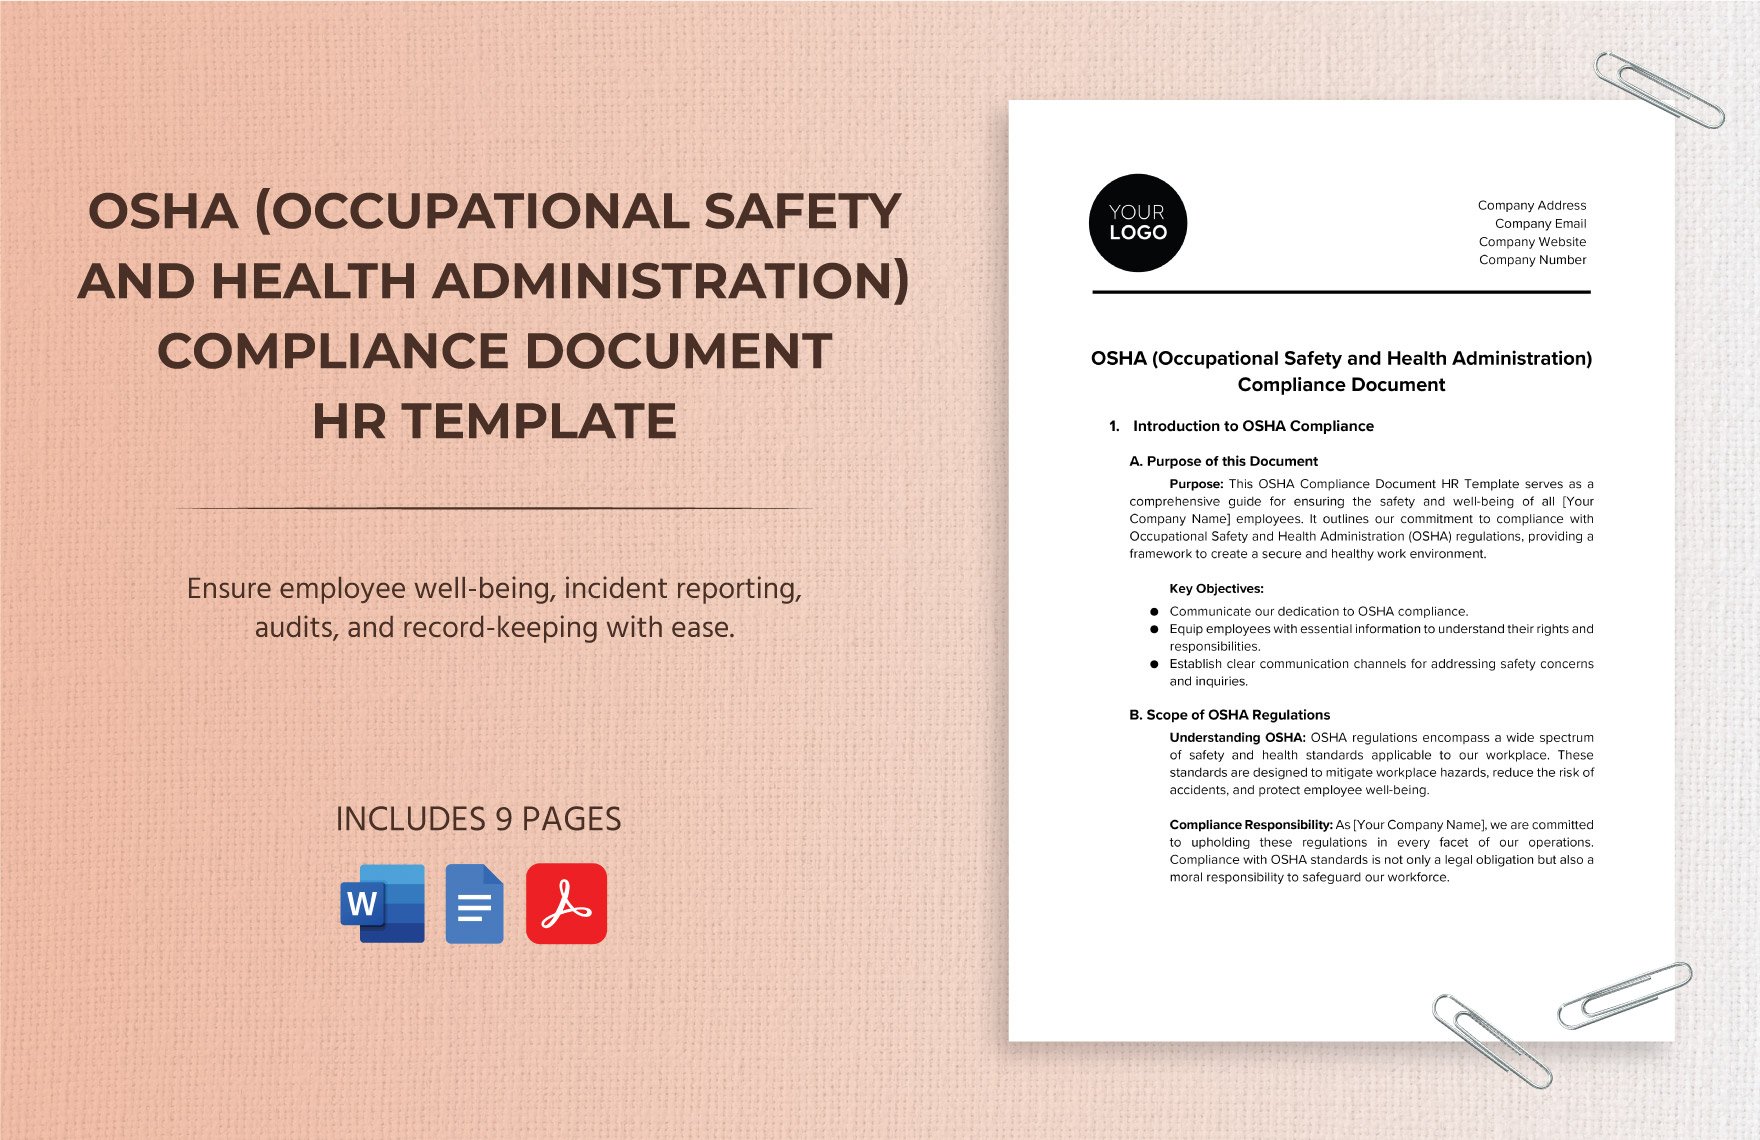 OSHA (Occupational Safety and Health Administration) Compliance Document HR Template